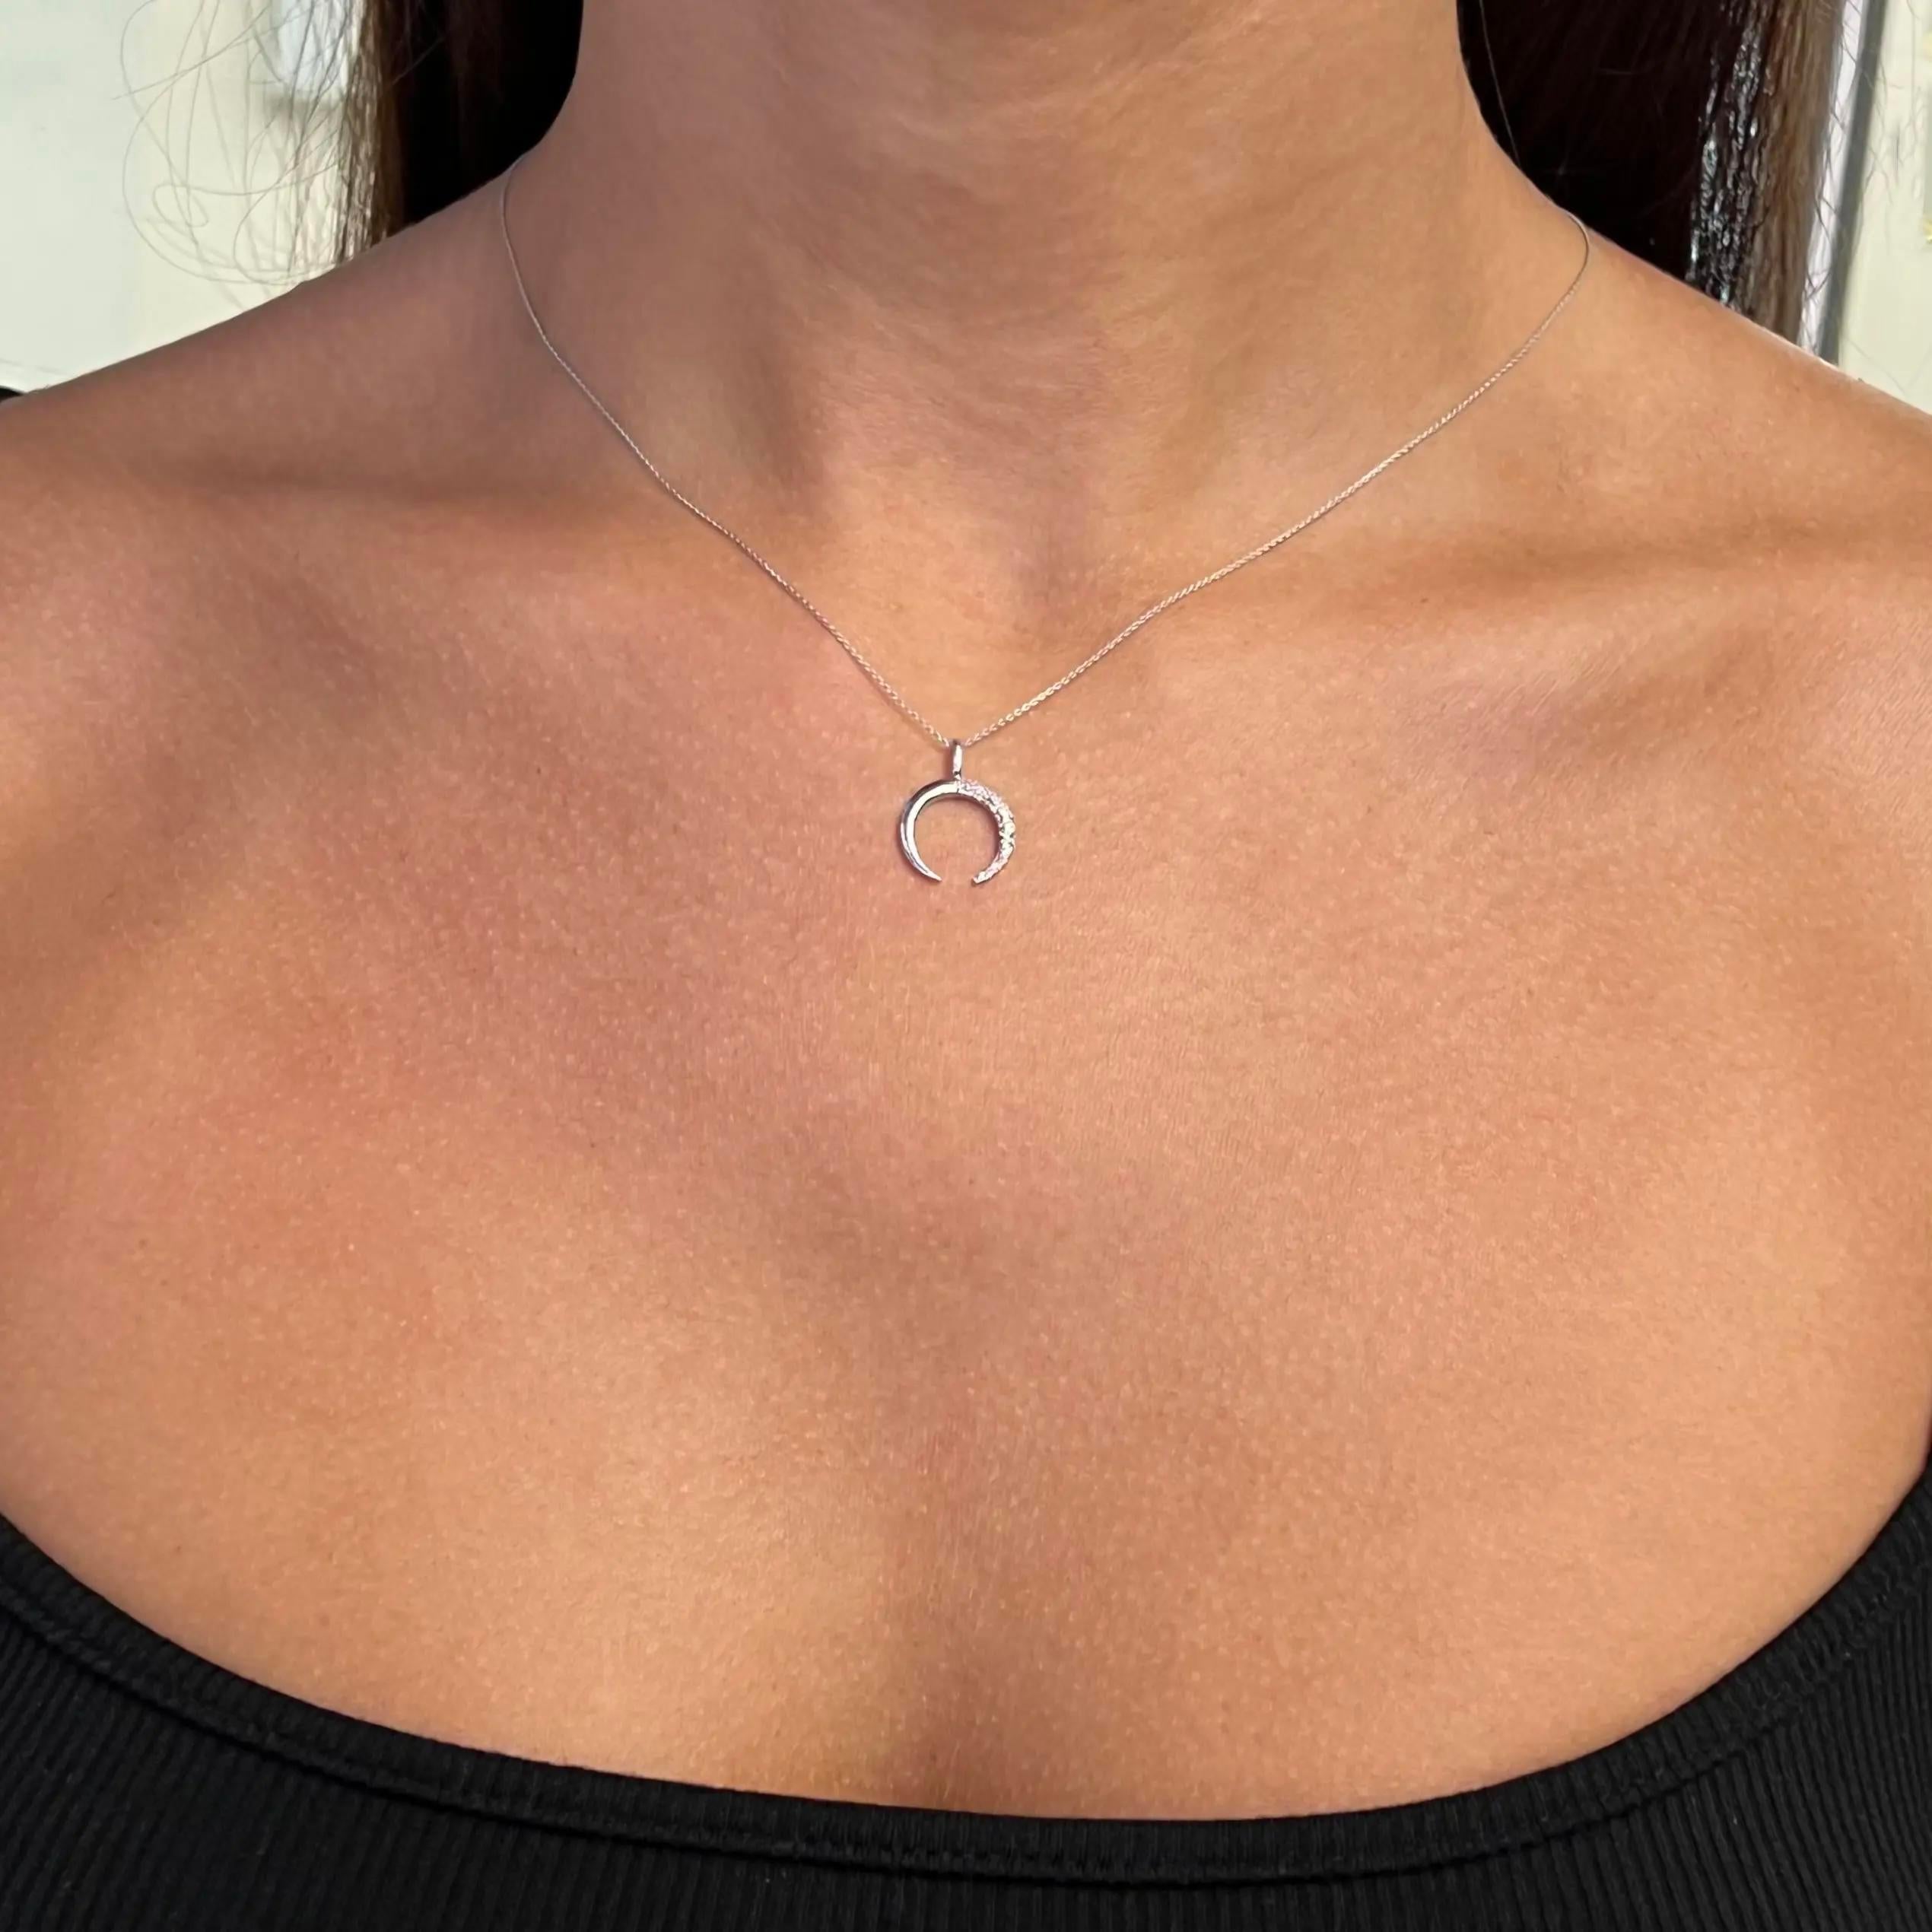 Diamond Crescent Pendant Necklace Round Cut In 14K White Gold 0.10Cttw For Sale 1